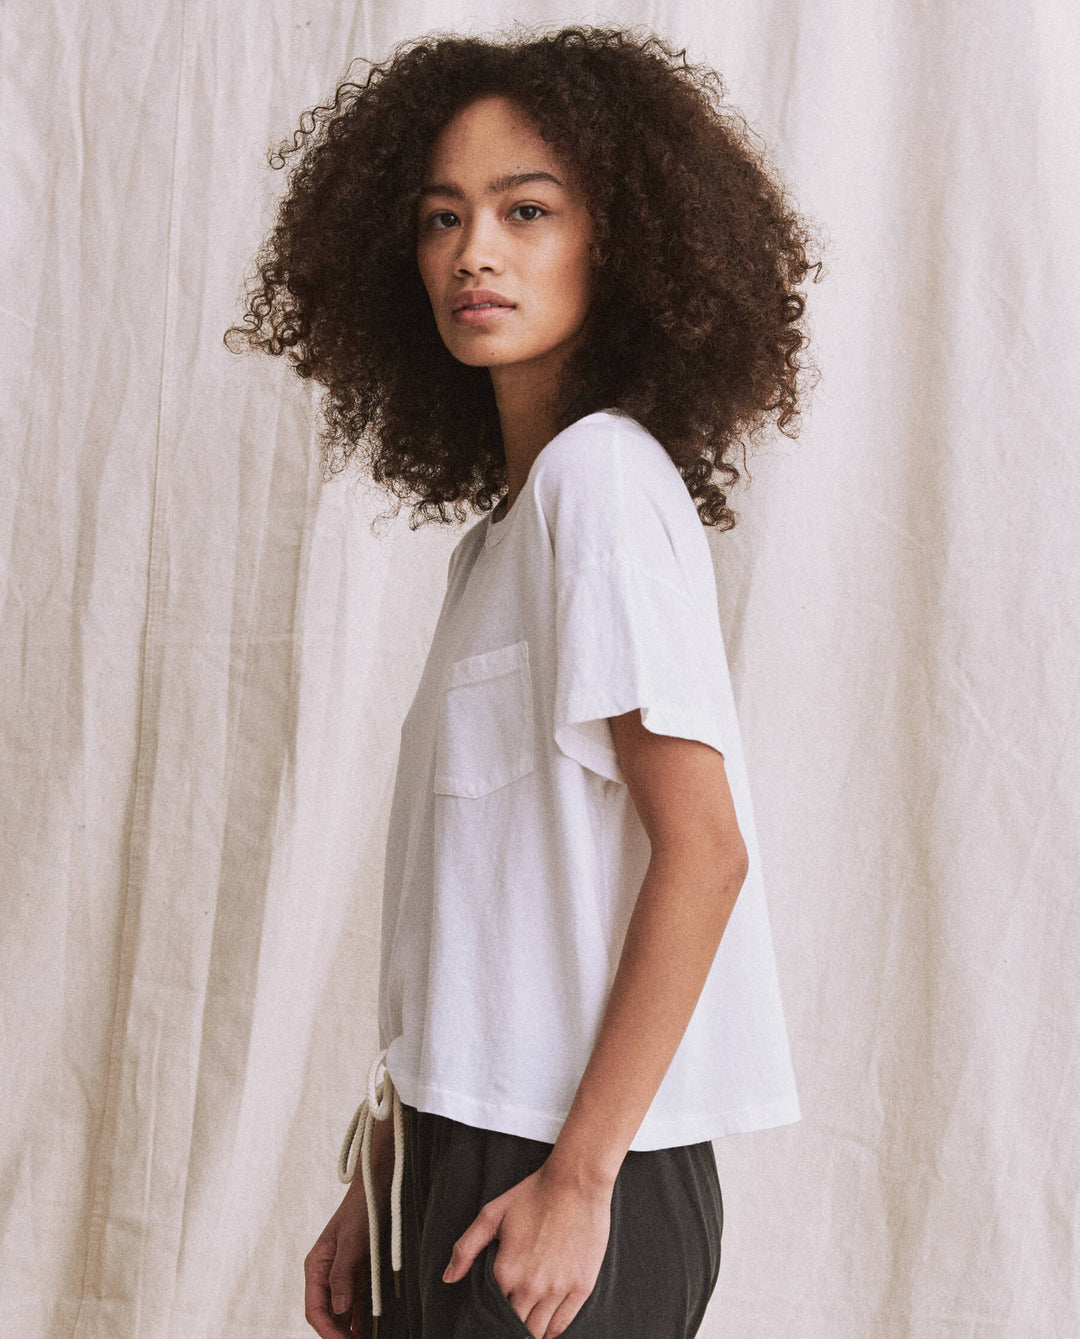 The Great - The Pocket Tee in True White